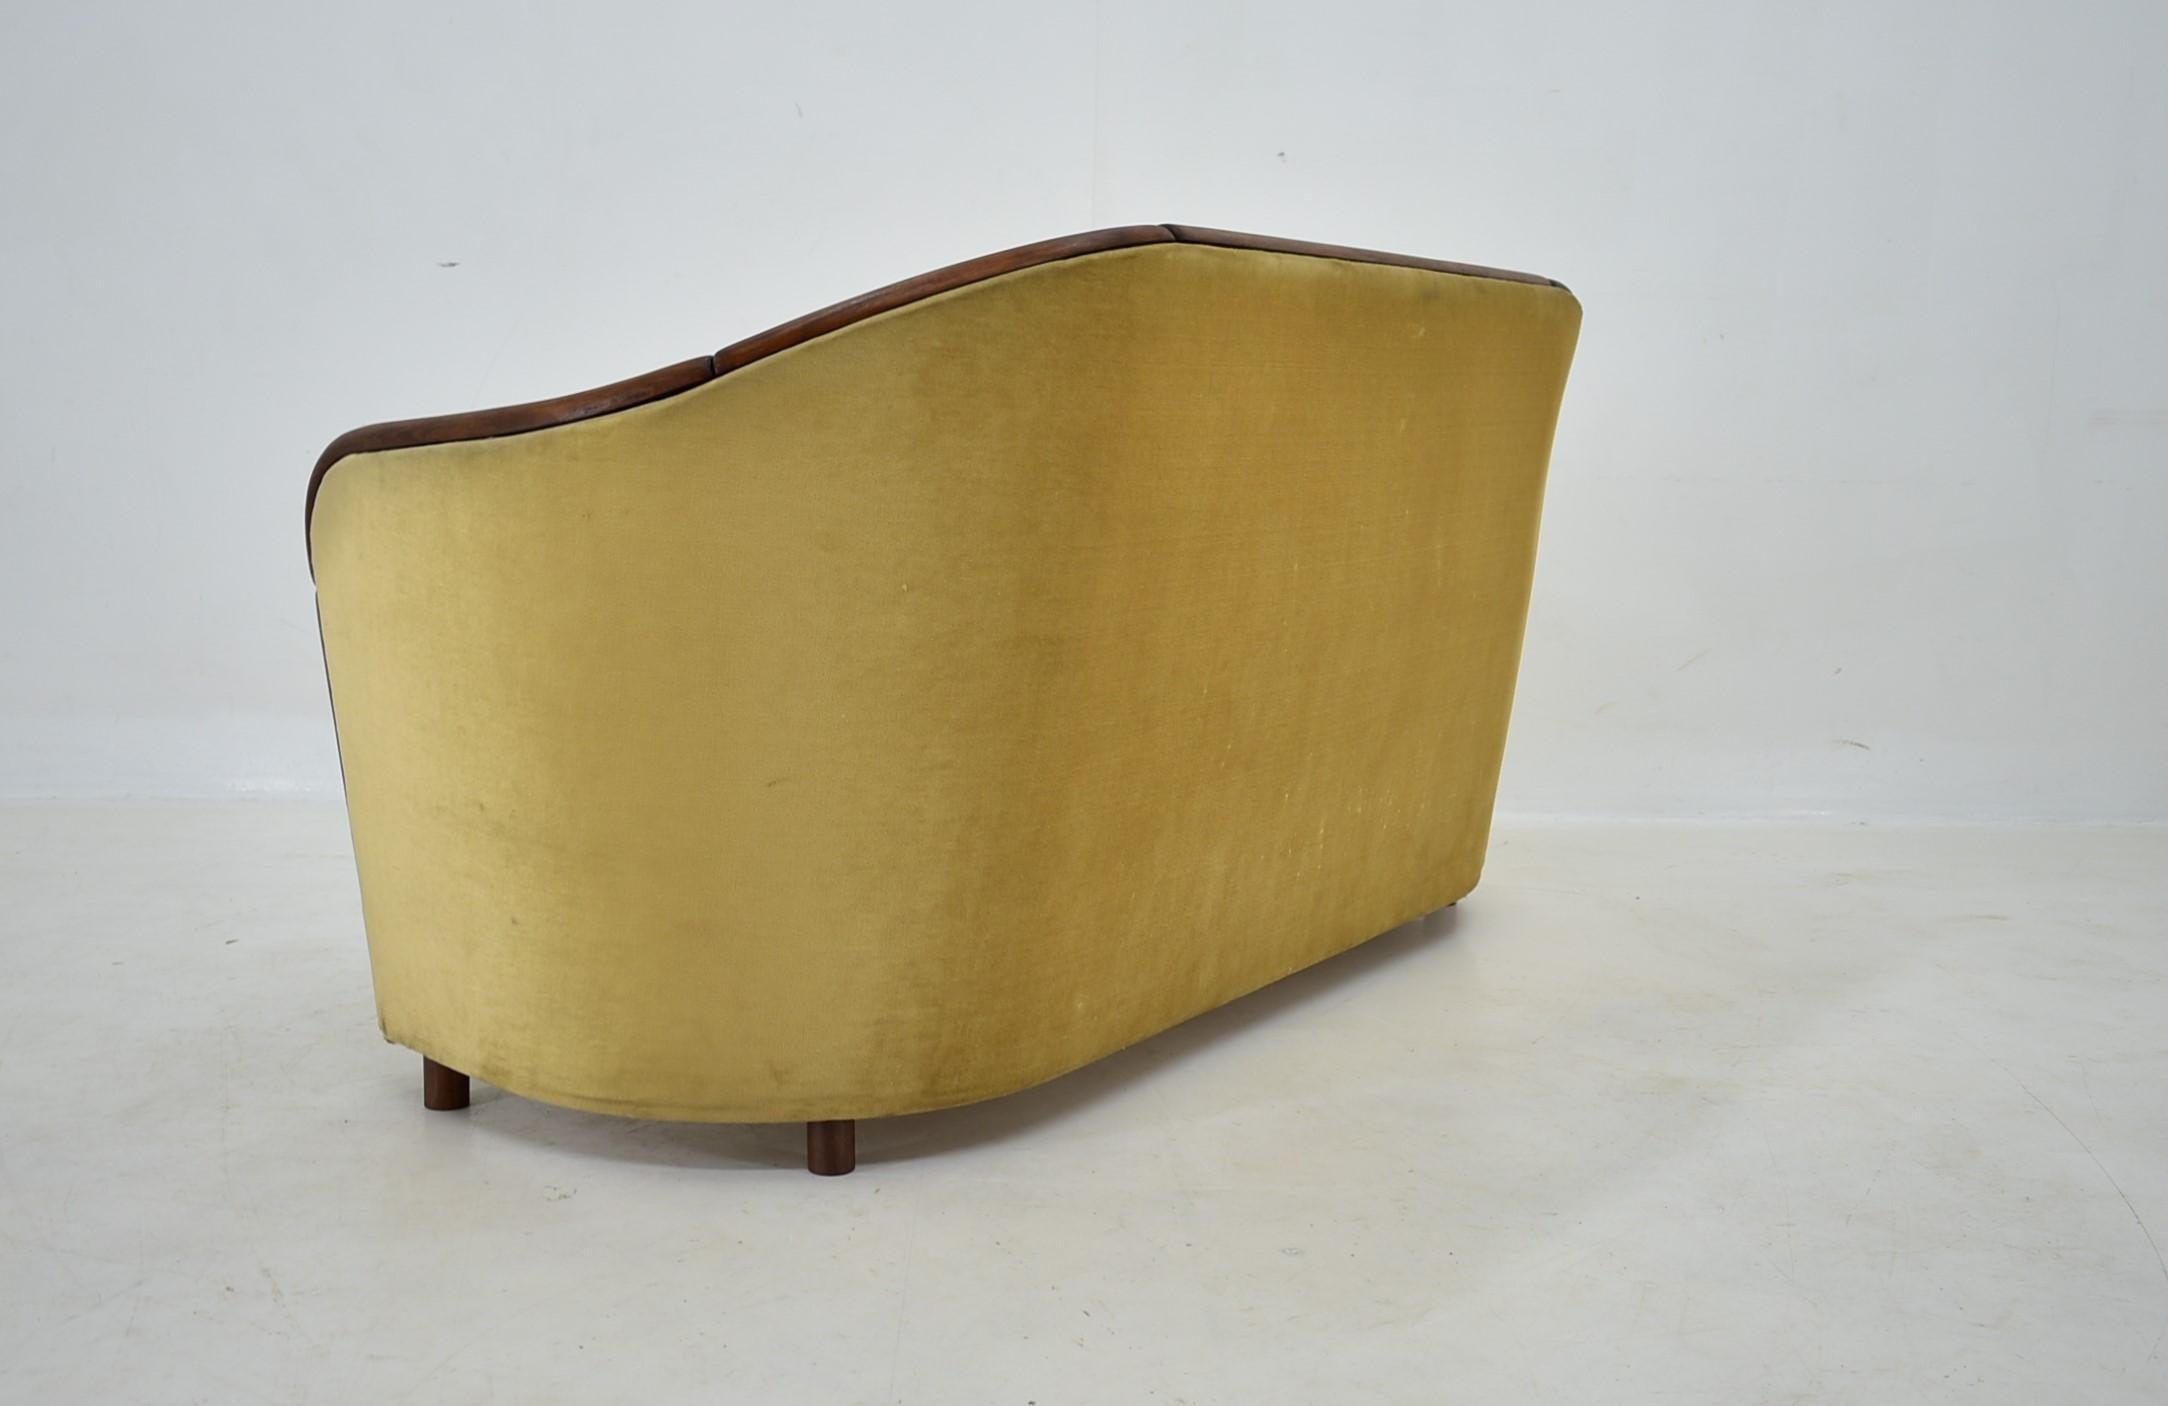 Italian 2-Seat Sofa in the Style of Gio Ponti, 1950s For Sale 5